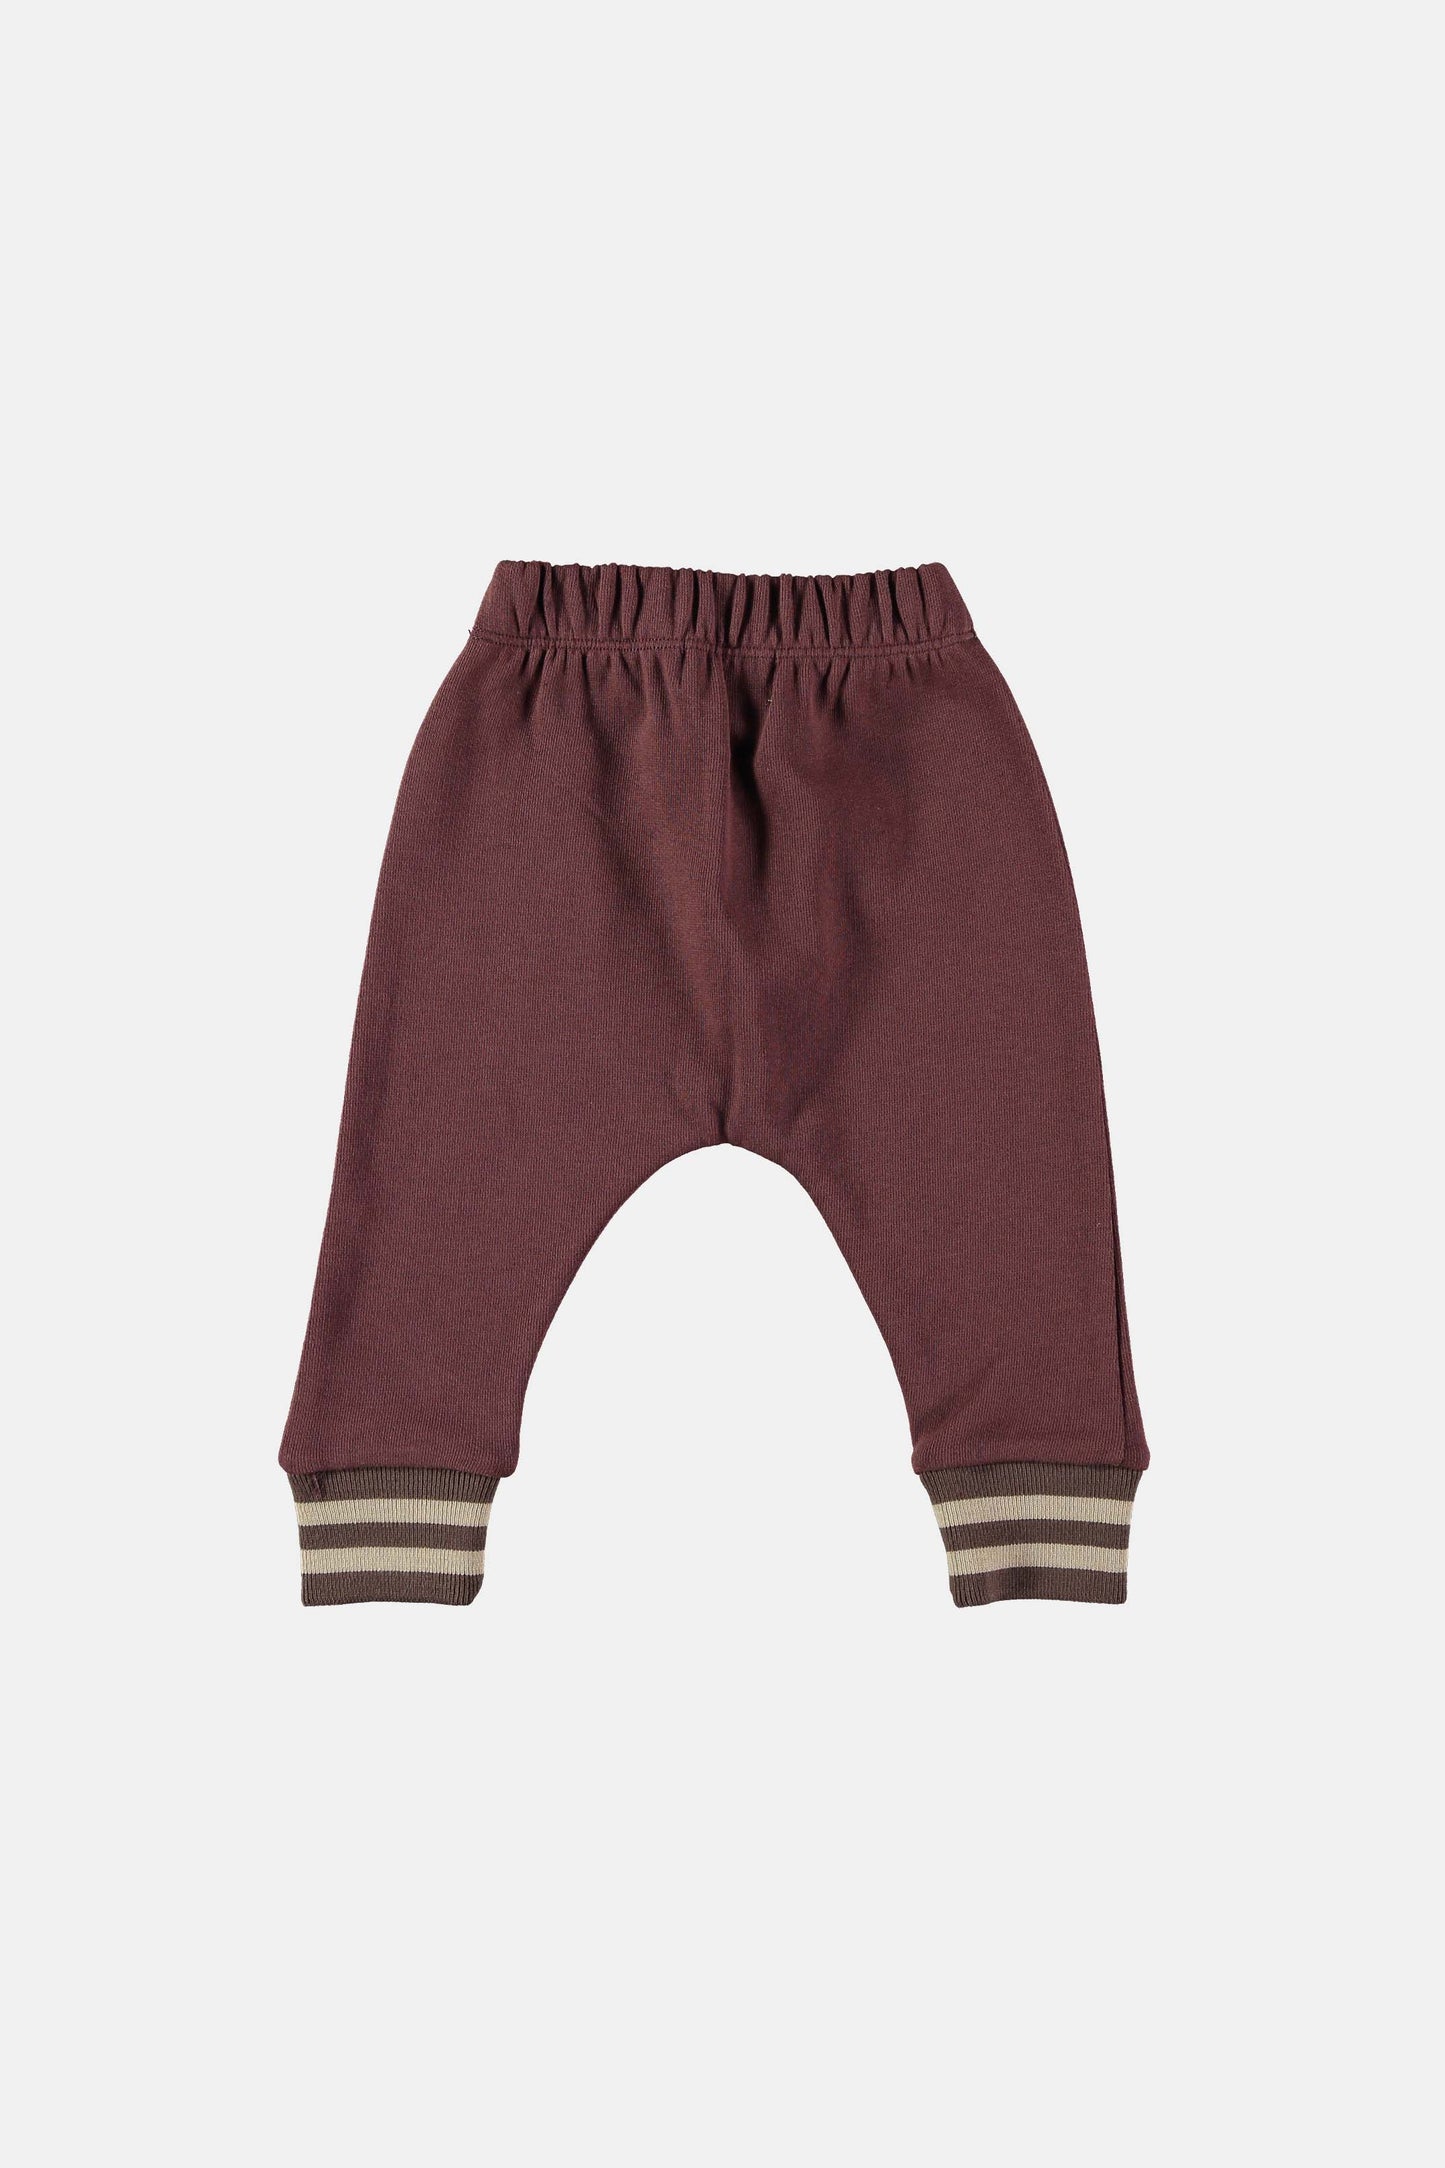 Coco Au Lait BROWN STONE BABY PLUSH TROUSERS  Brown Stone